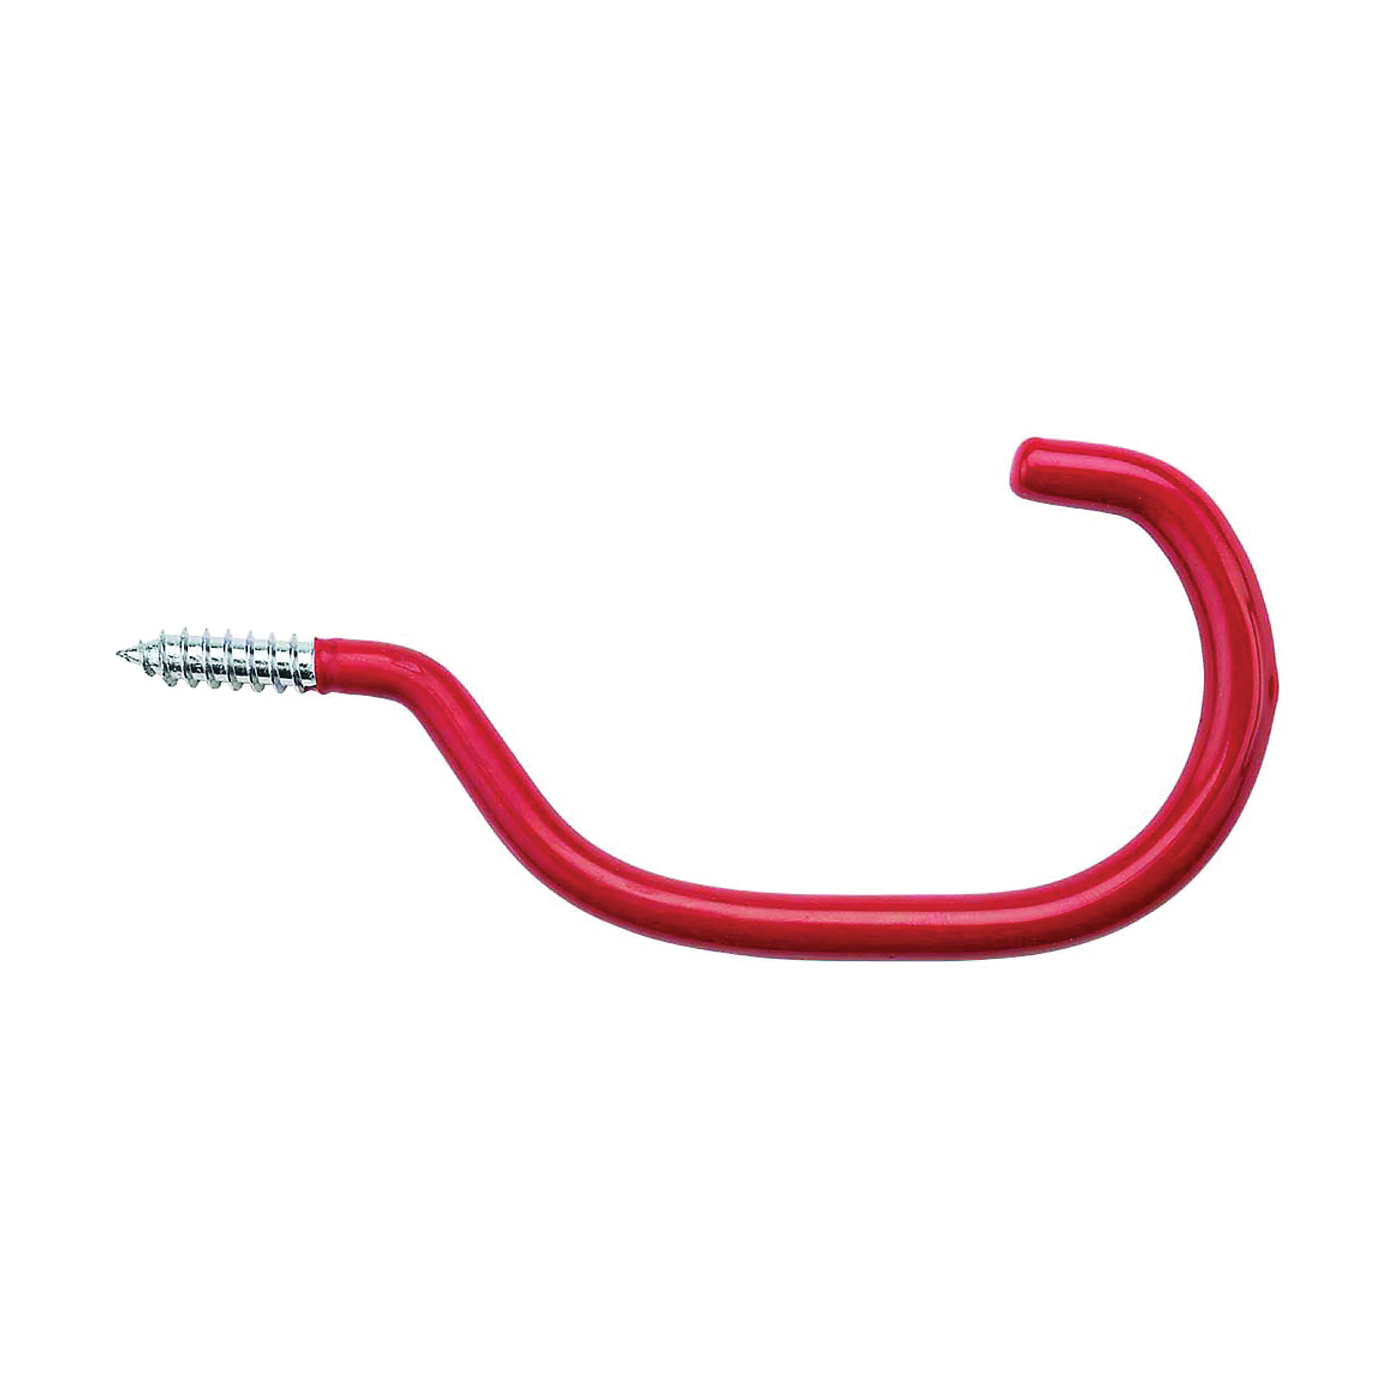 V2158 N188-007 Bicycle Hook, 40 lb, Over-The-Door Mounting, Steel, Red